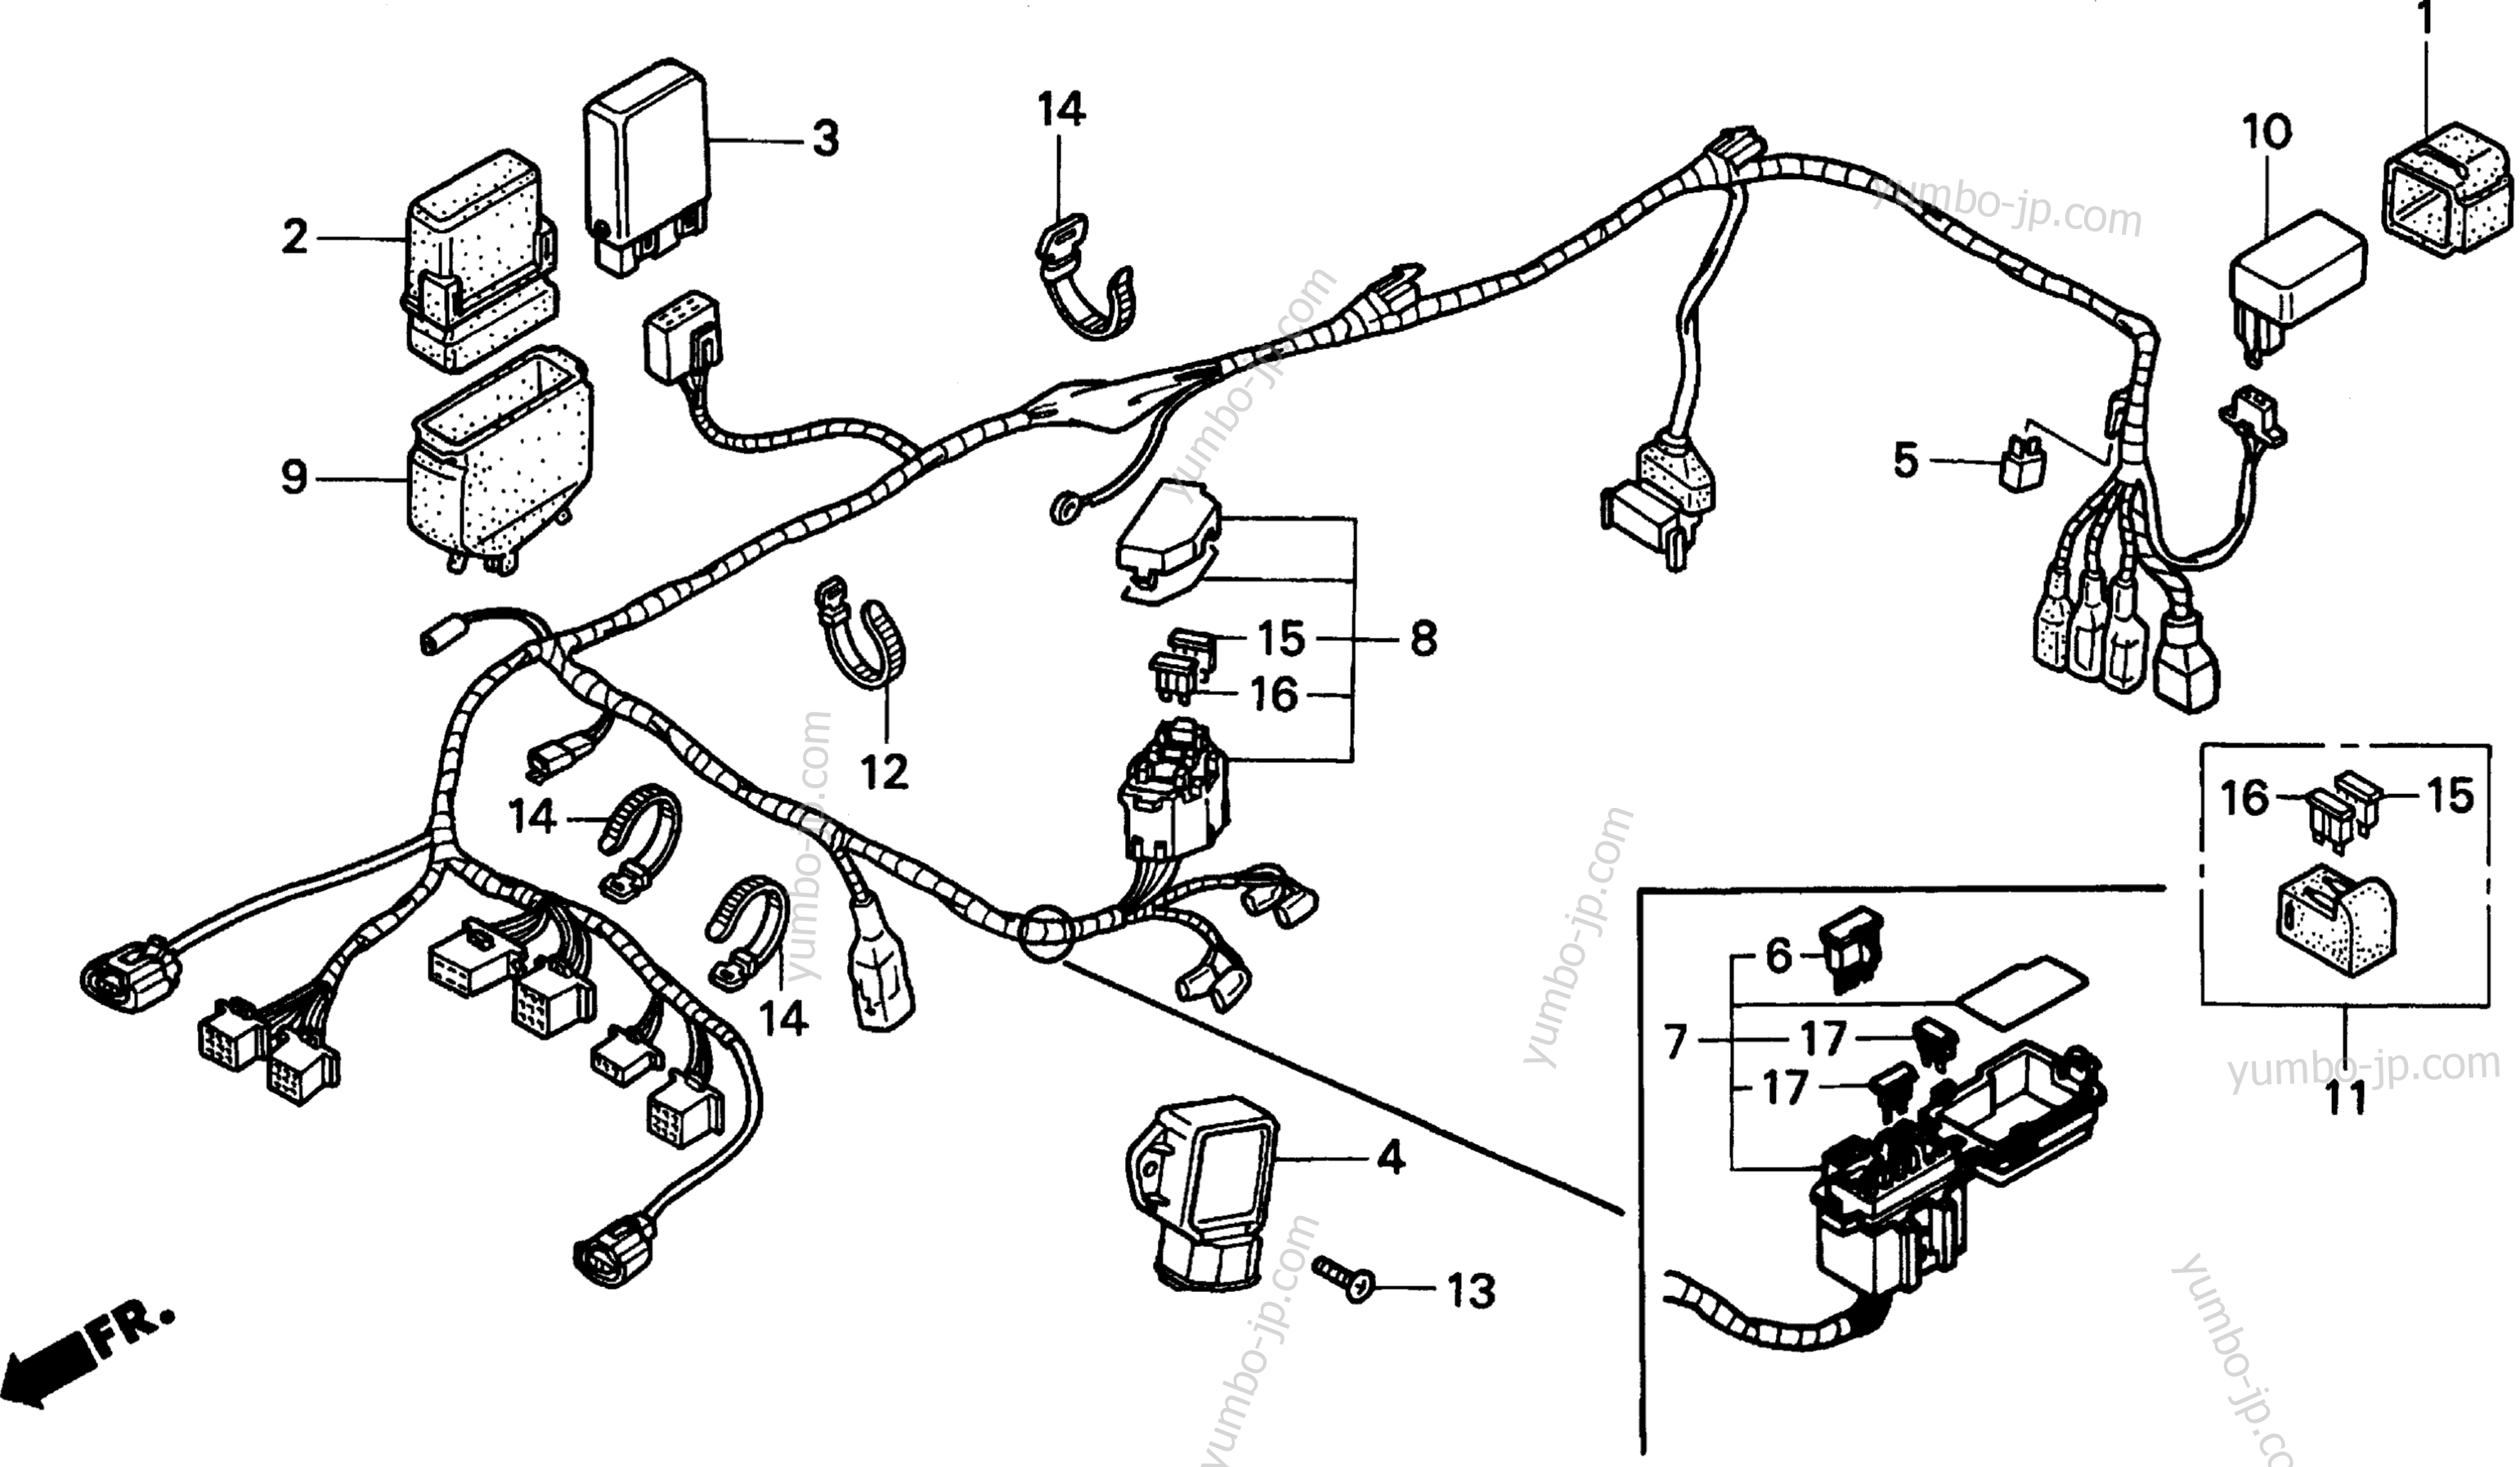 WIRE HARNESS for motorcycles HONDA PC800 A 1996 year